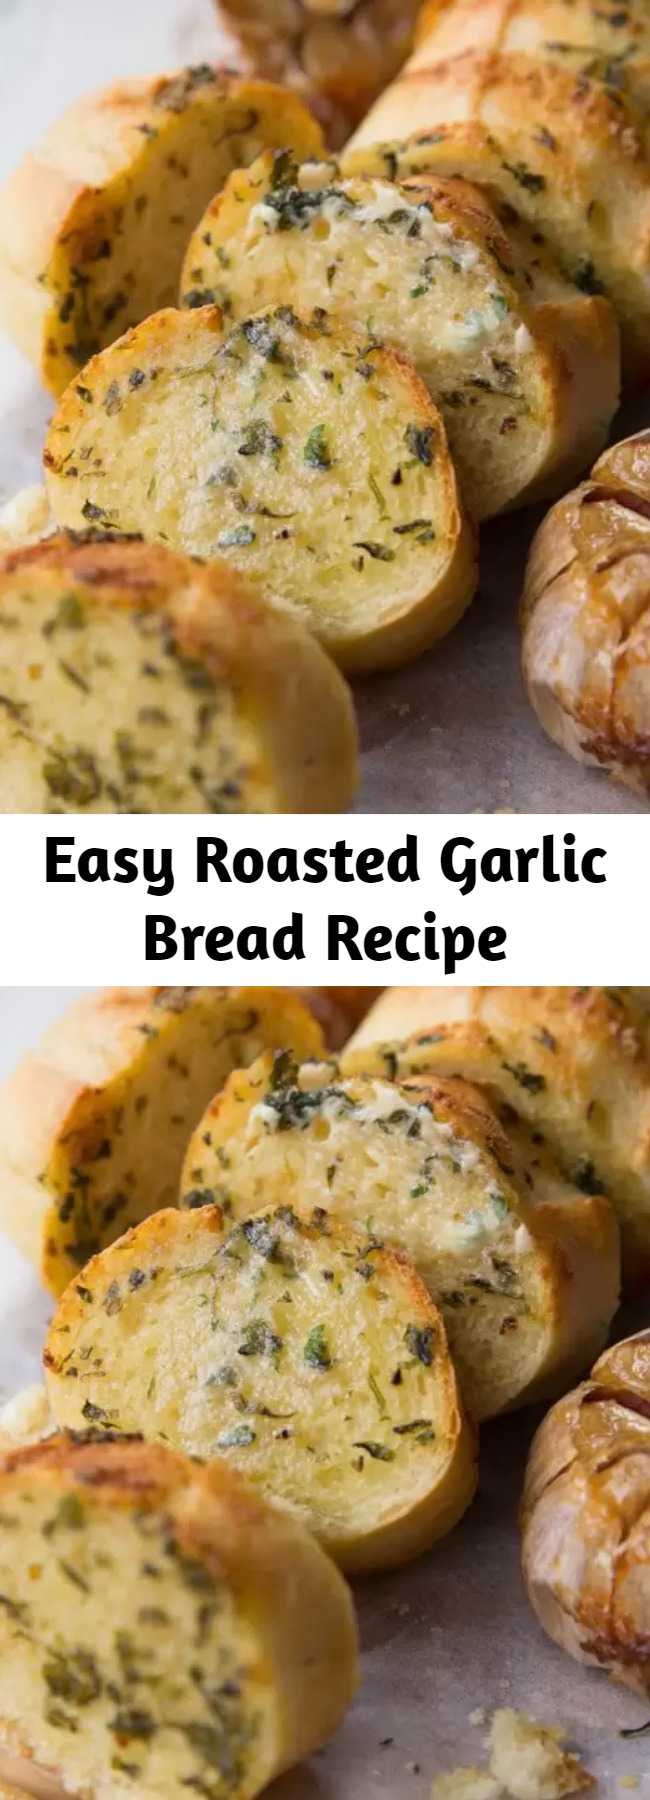 Easy Roasted Garlic Bread Recipe - Take your homemade garlic bread to the next level by using roasted garlic! Using minimal ingredients this truly is the ultimate side dish to any meal! #bread #garlicbread #sidedish #appetizer